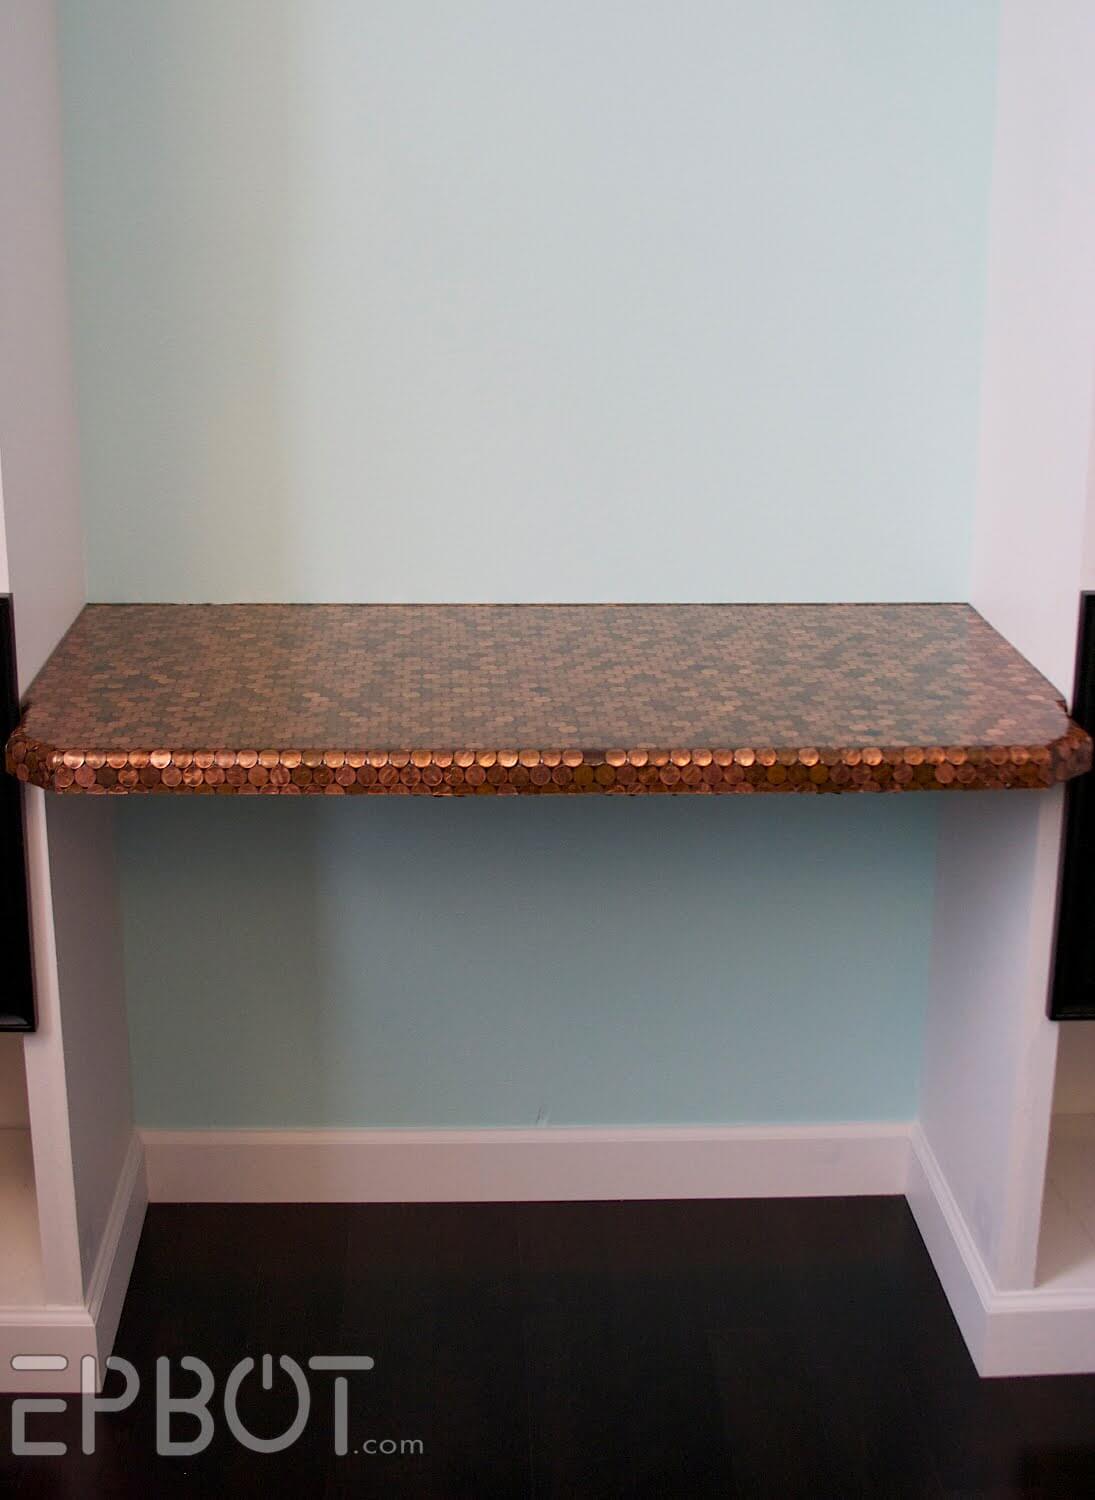 Using Pennies to Finish a Built-In Desk